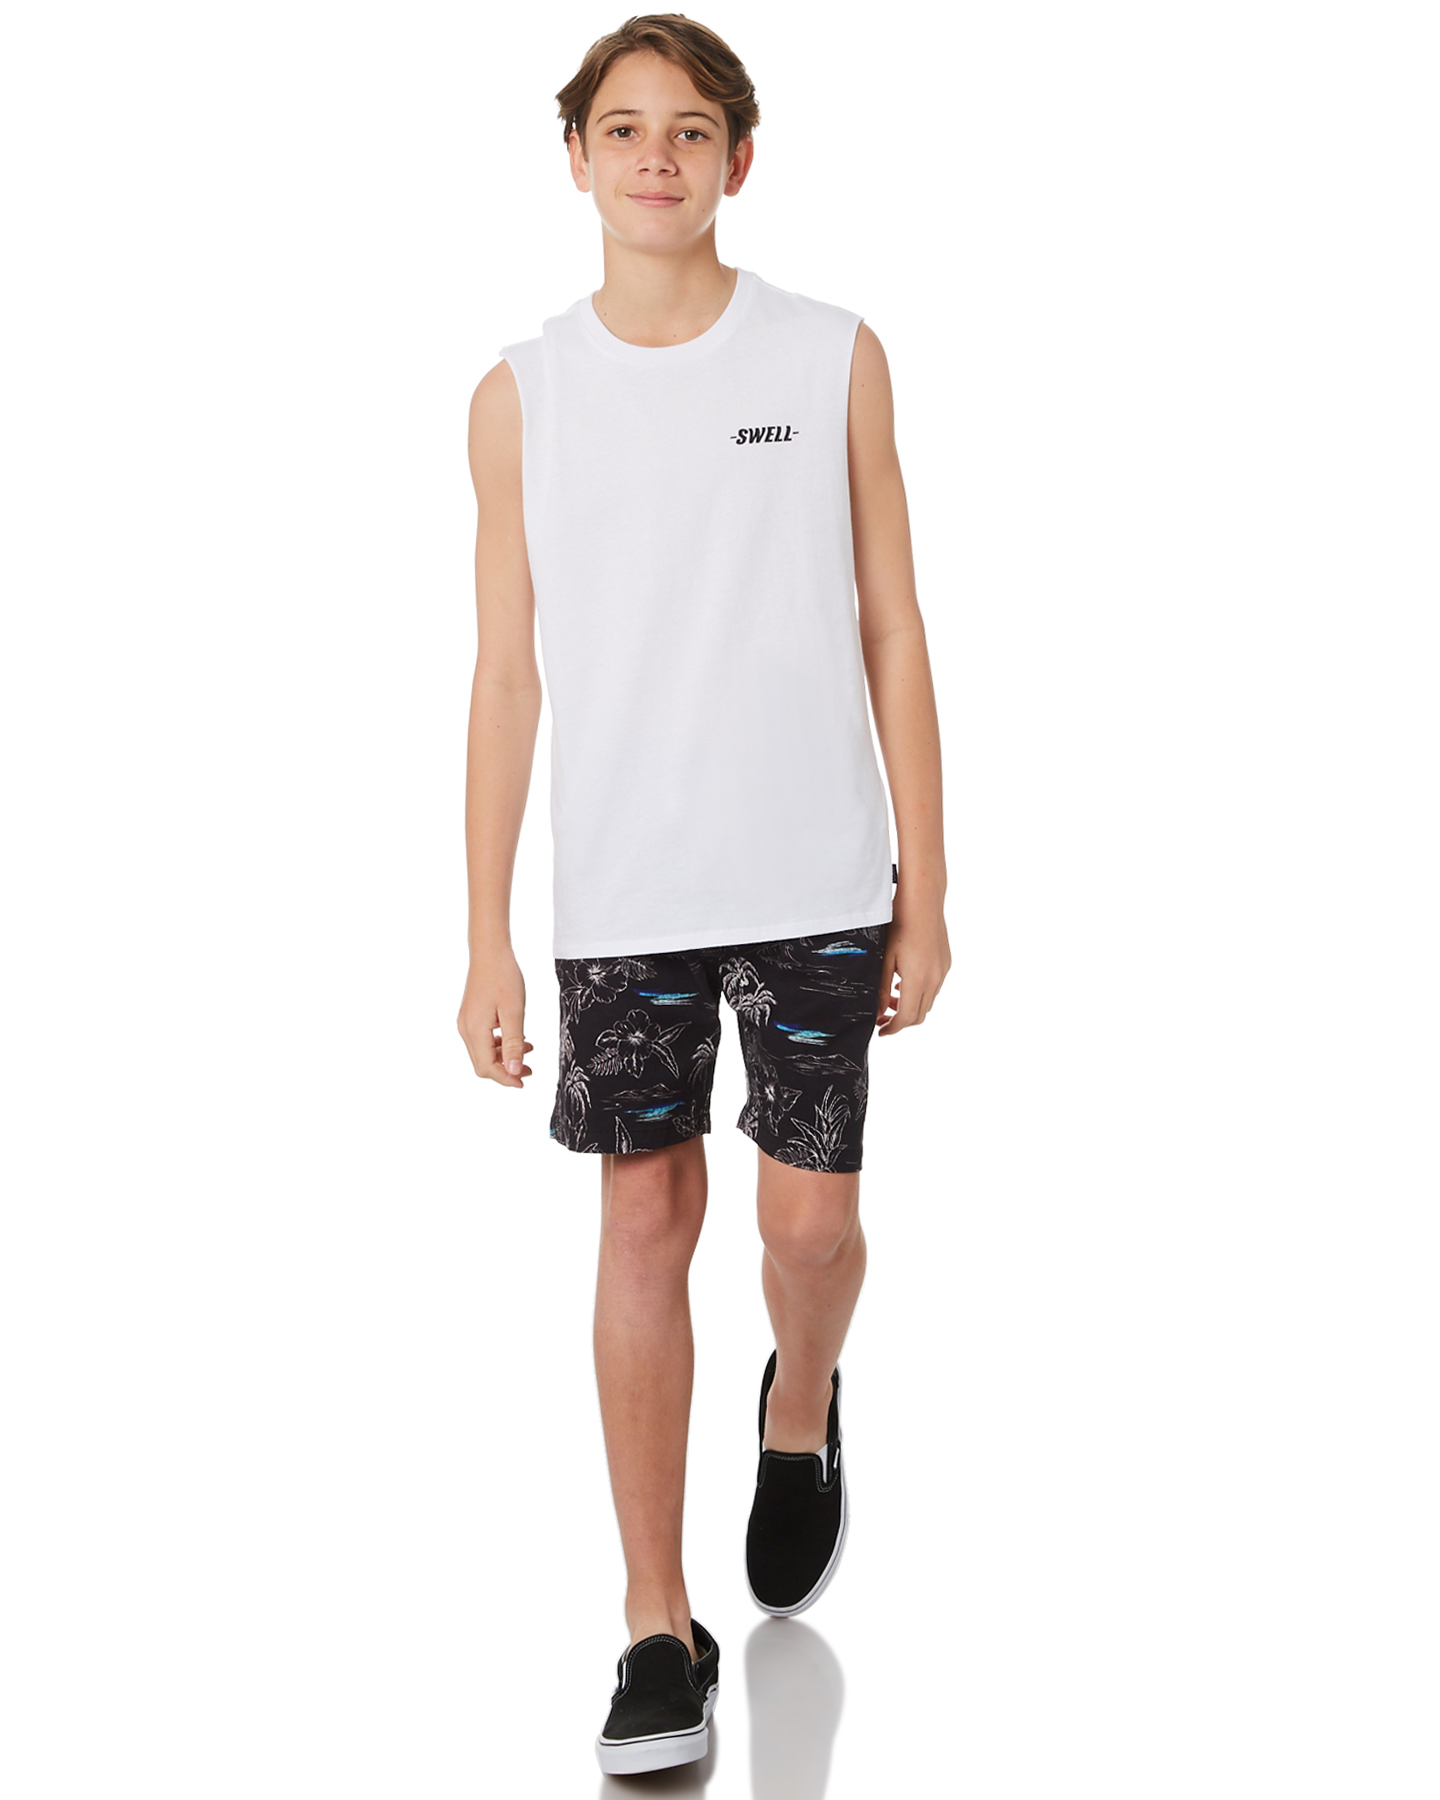 Swell Boys Defiant Muscle - Teens - White | SurfStitch